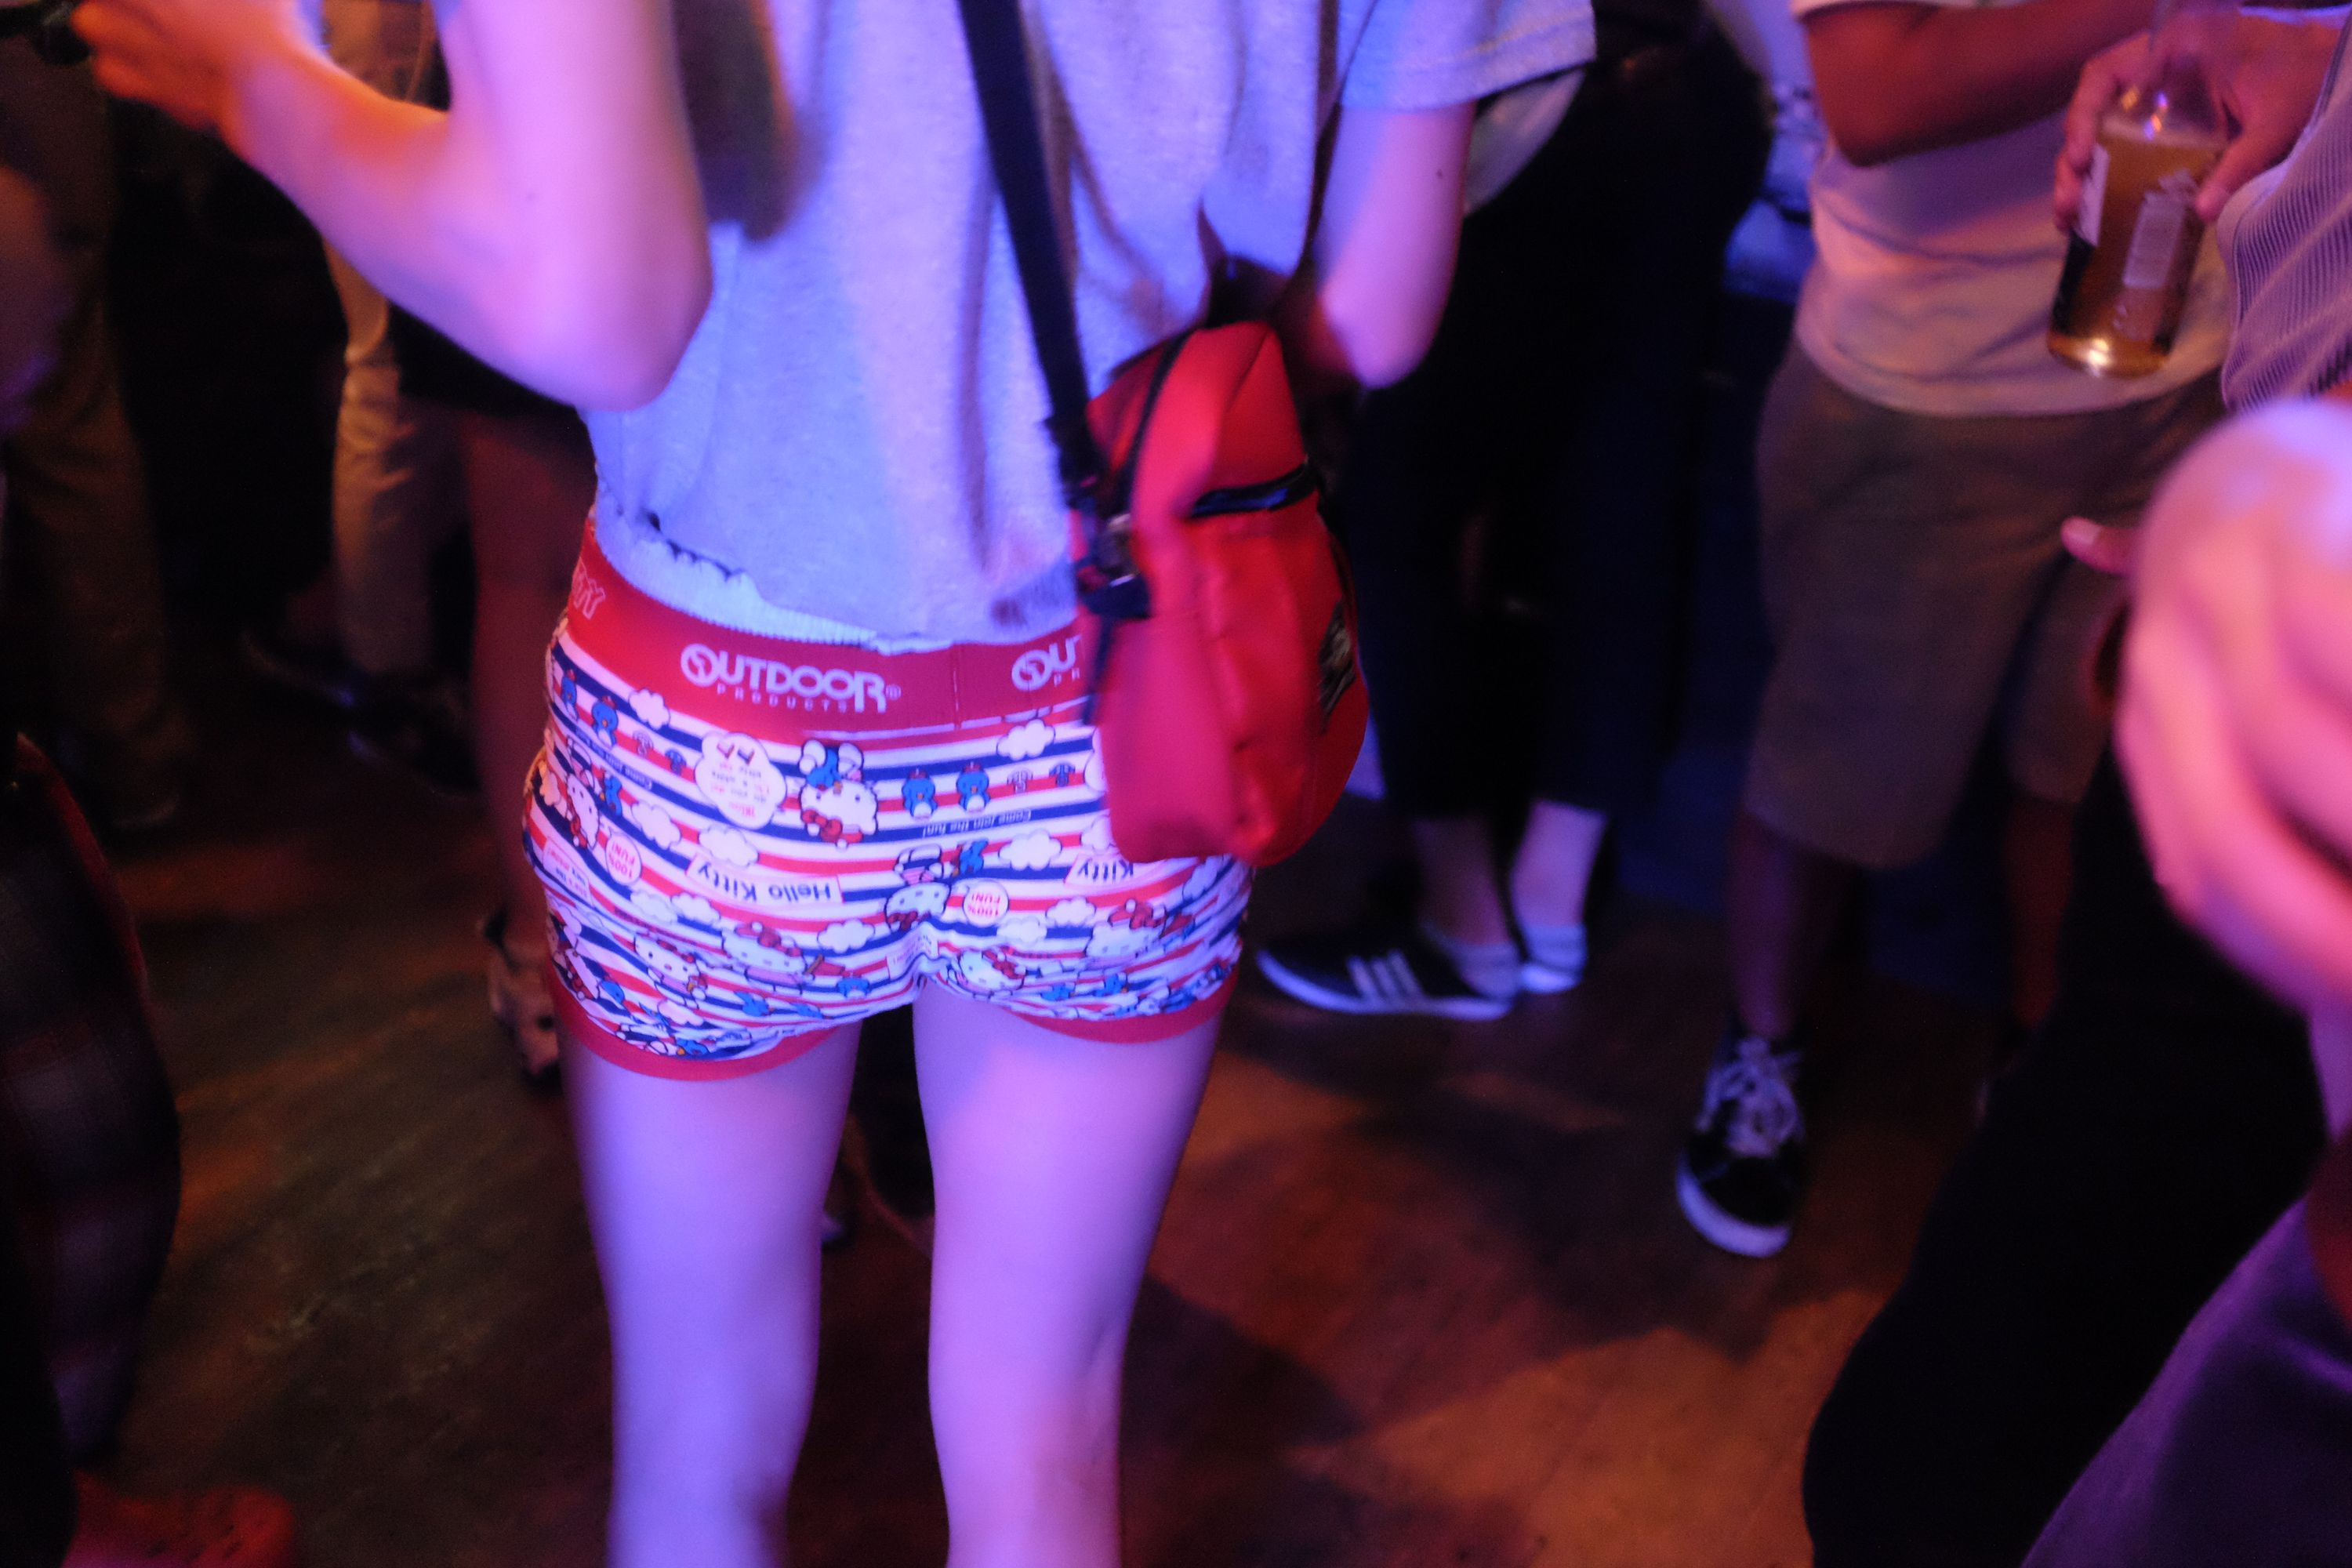 A person wears a pair of Hello Kitty shorts which look like boxer briefs in what looks like a crowded bar.